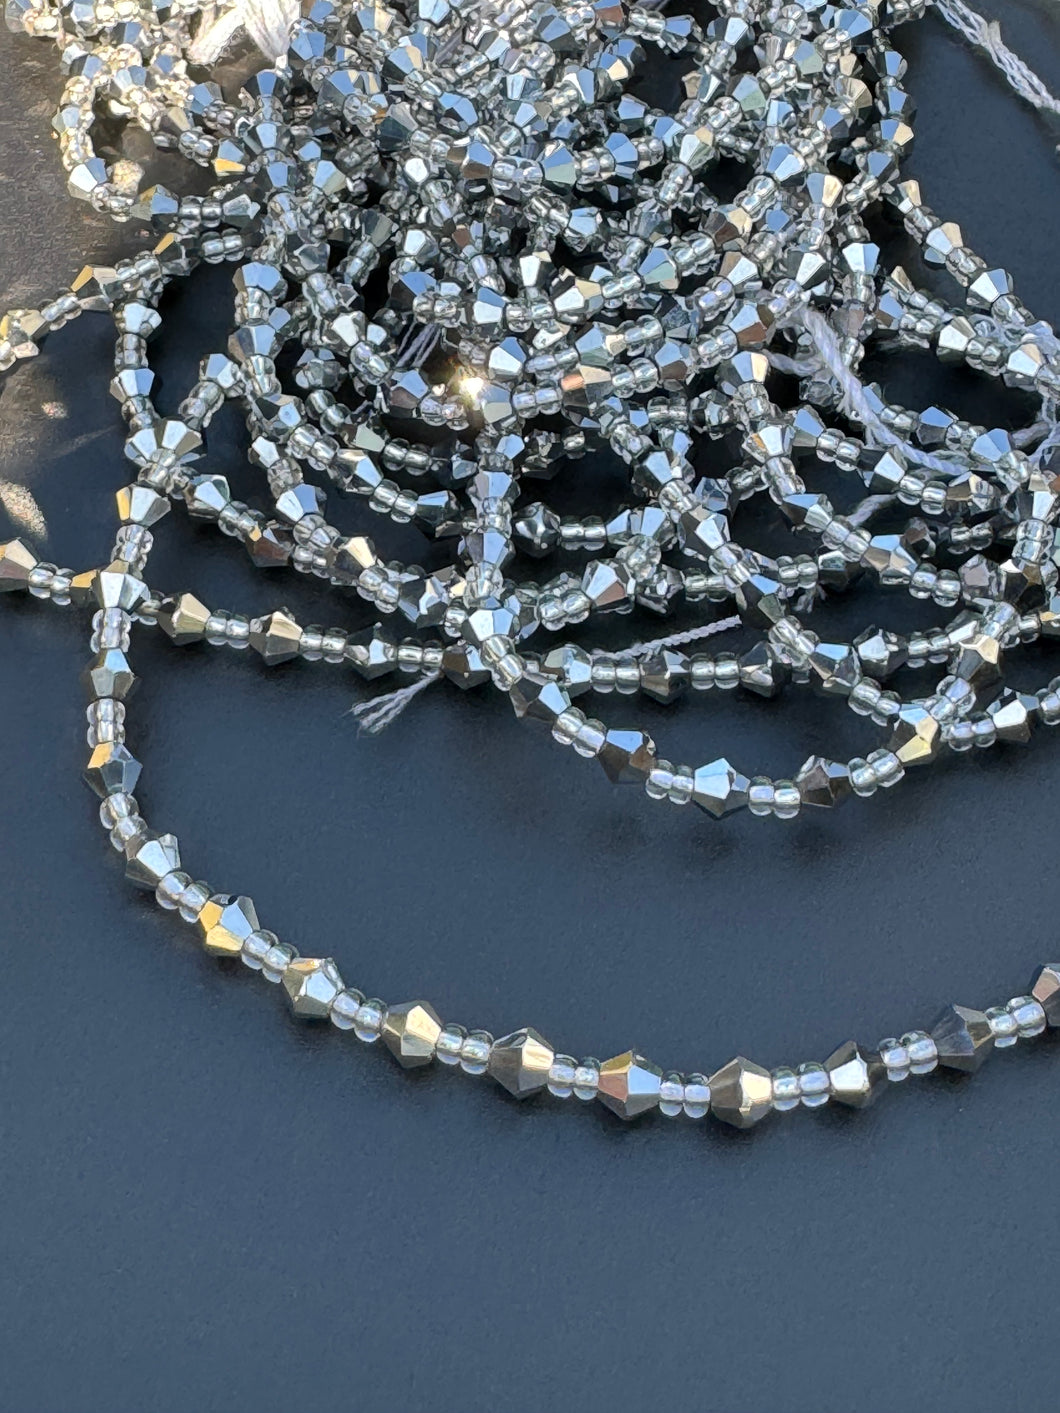 Hyeden (Shiny or Glittery) Authentic Ghana Silver Waistbeads 45 Inches.